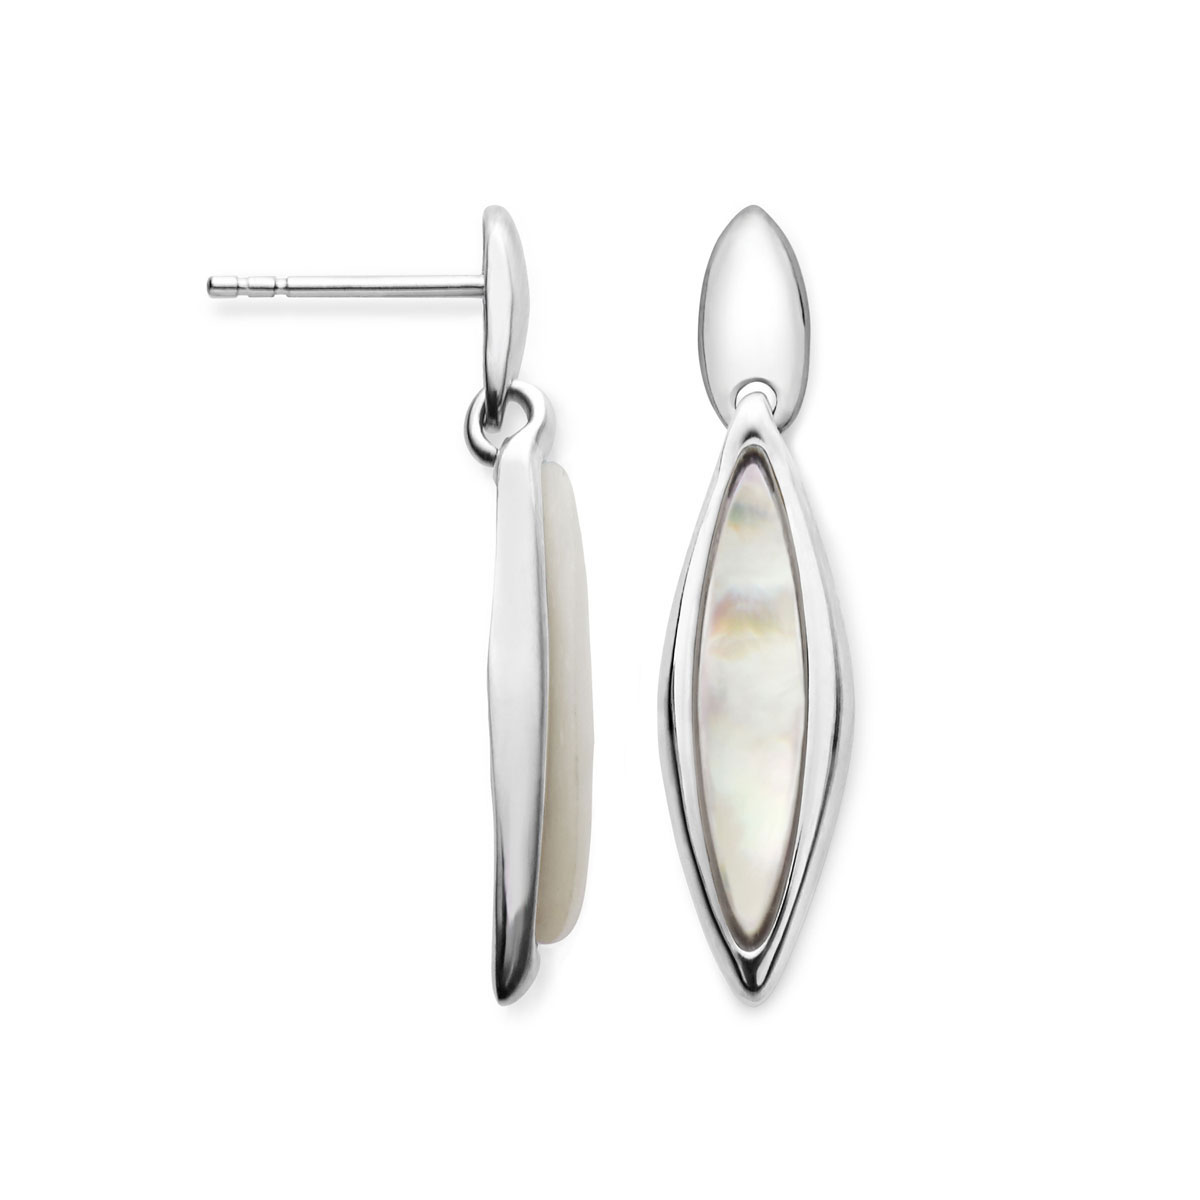 Nambe Jewelry Silver and White Marquise Earrings, Pair - Mother of Pearl